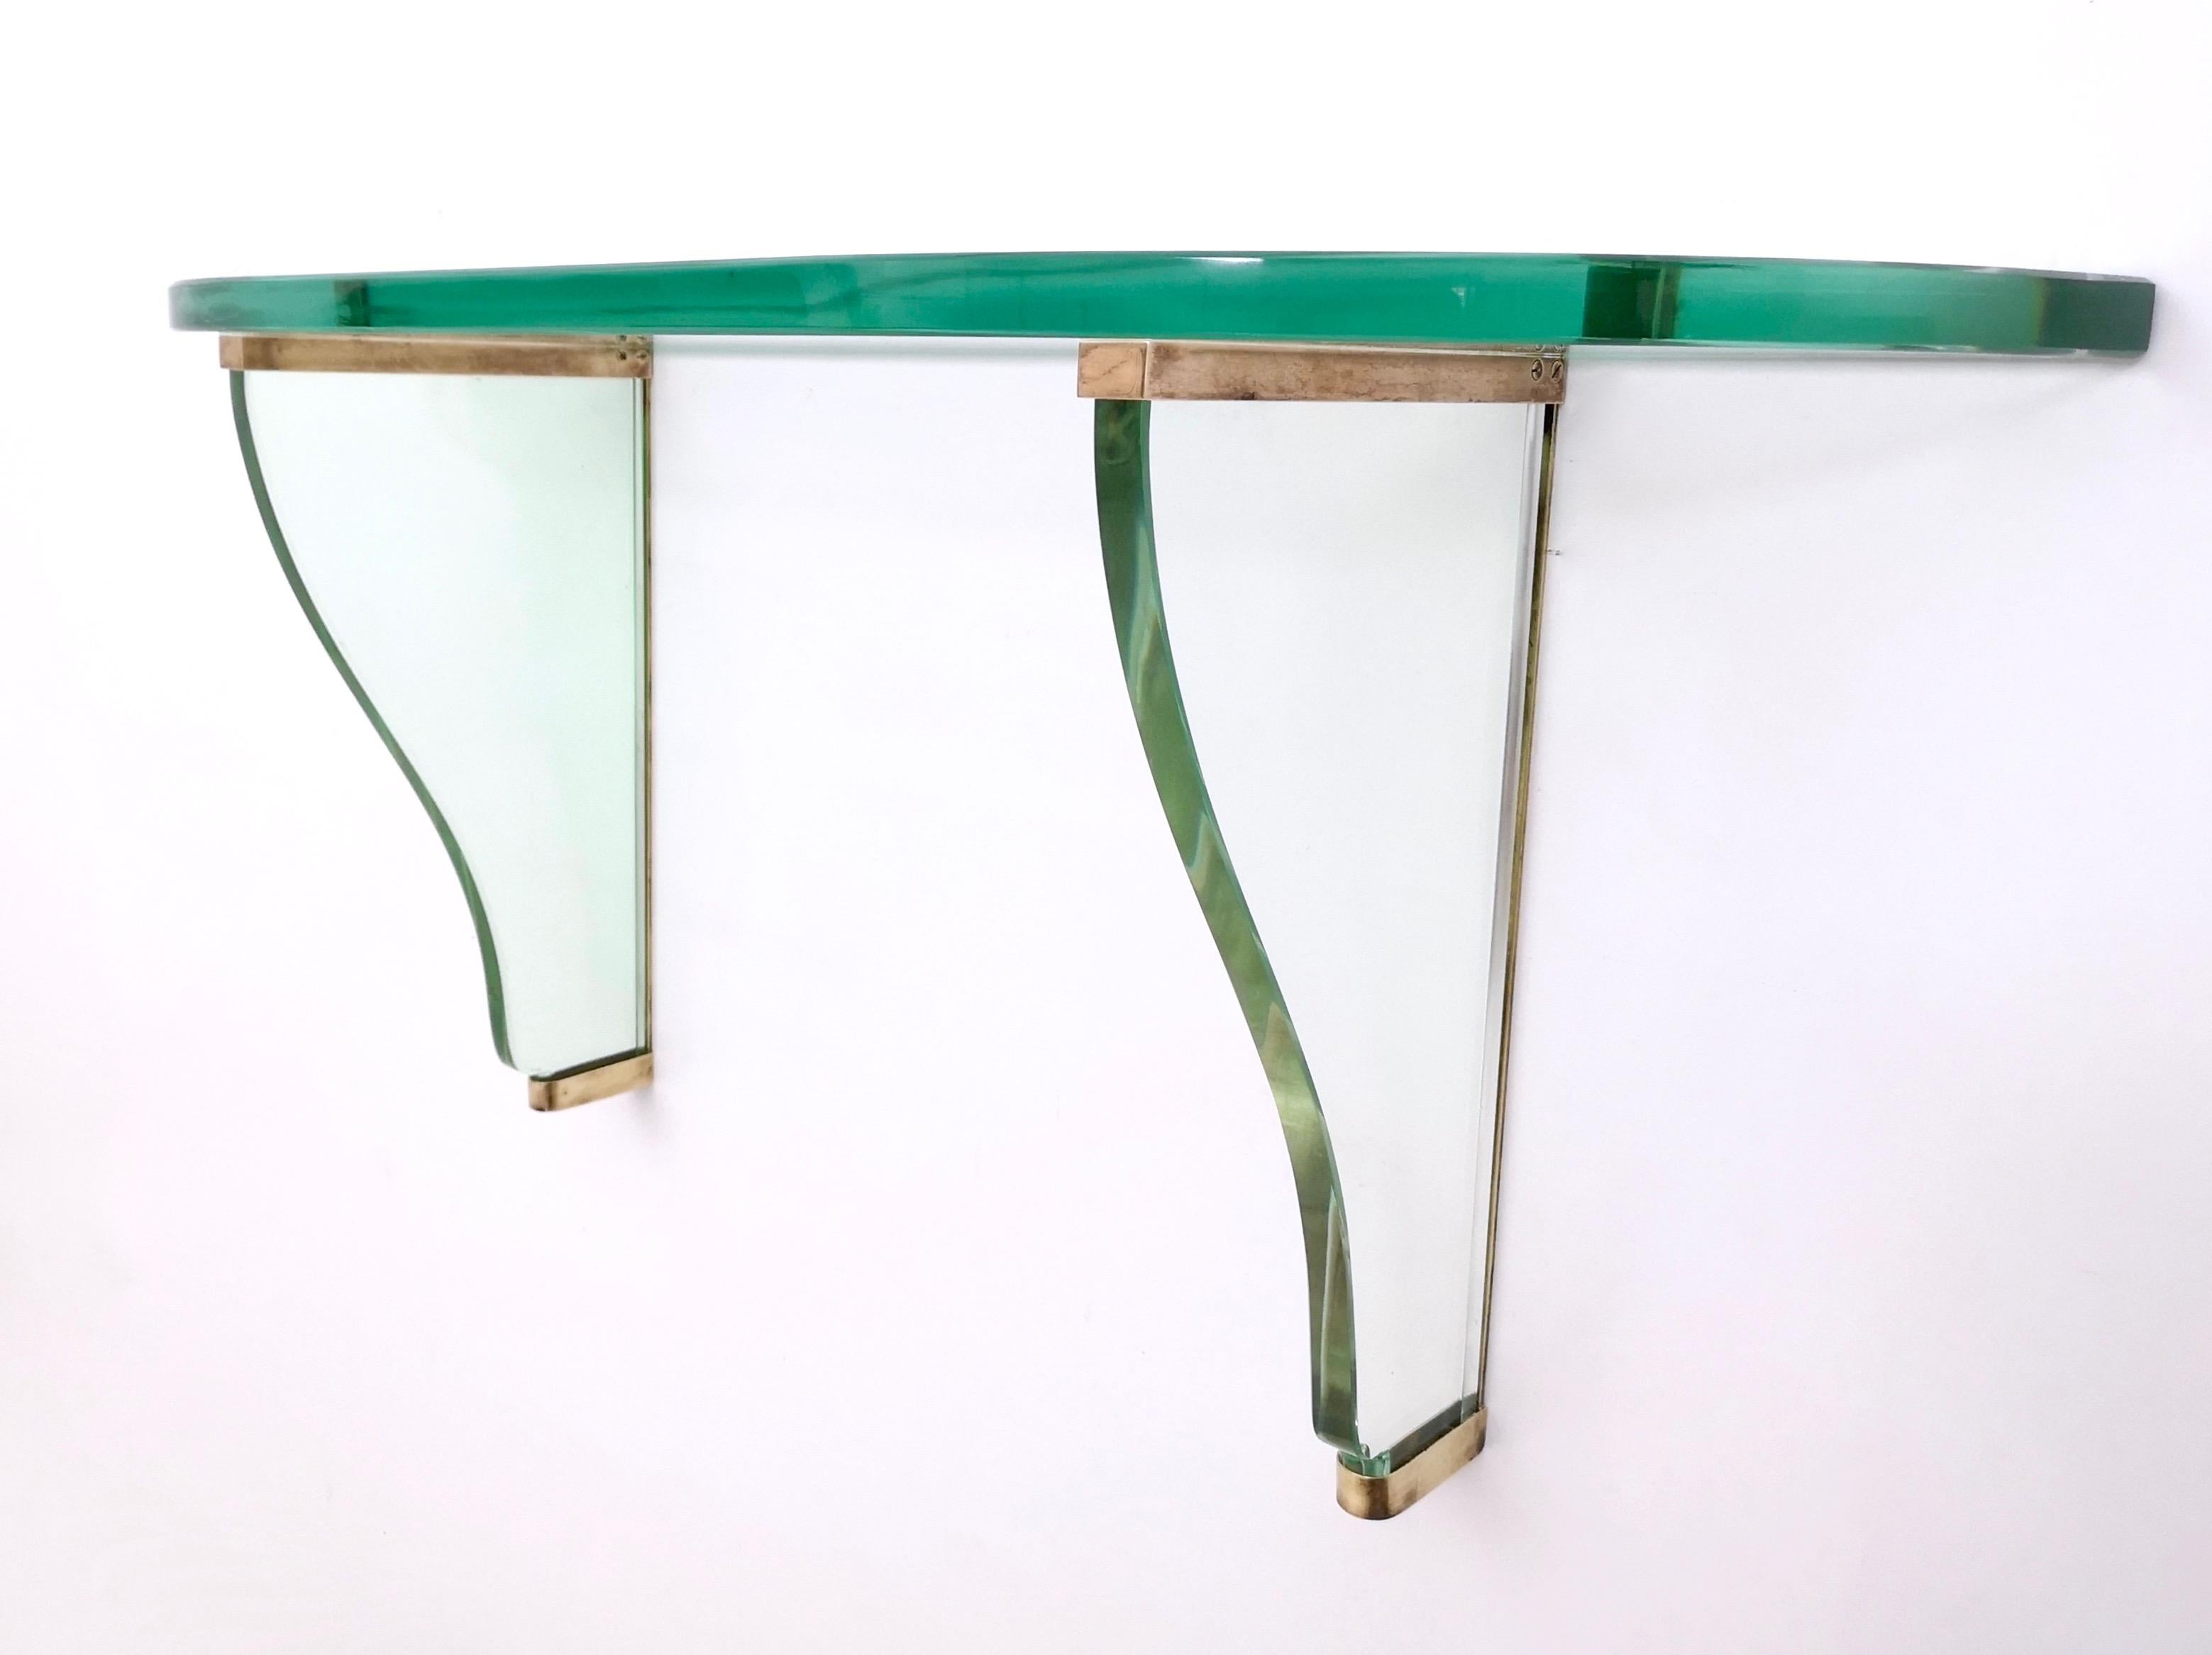 1940s.
This stunning wall-mounted console table features a brass frame and very thick green Nile glass tops and frame.
The originality of this piece is in the color of the glasses, which is extremely rare.
It may show slight traces use since it's